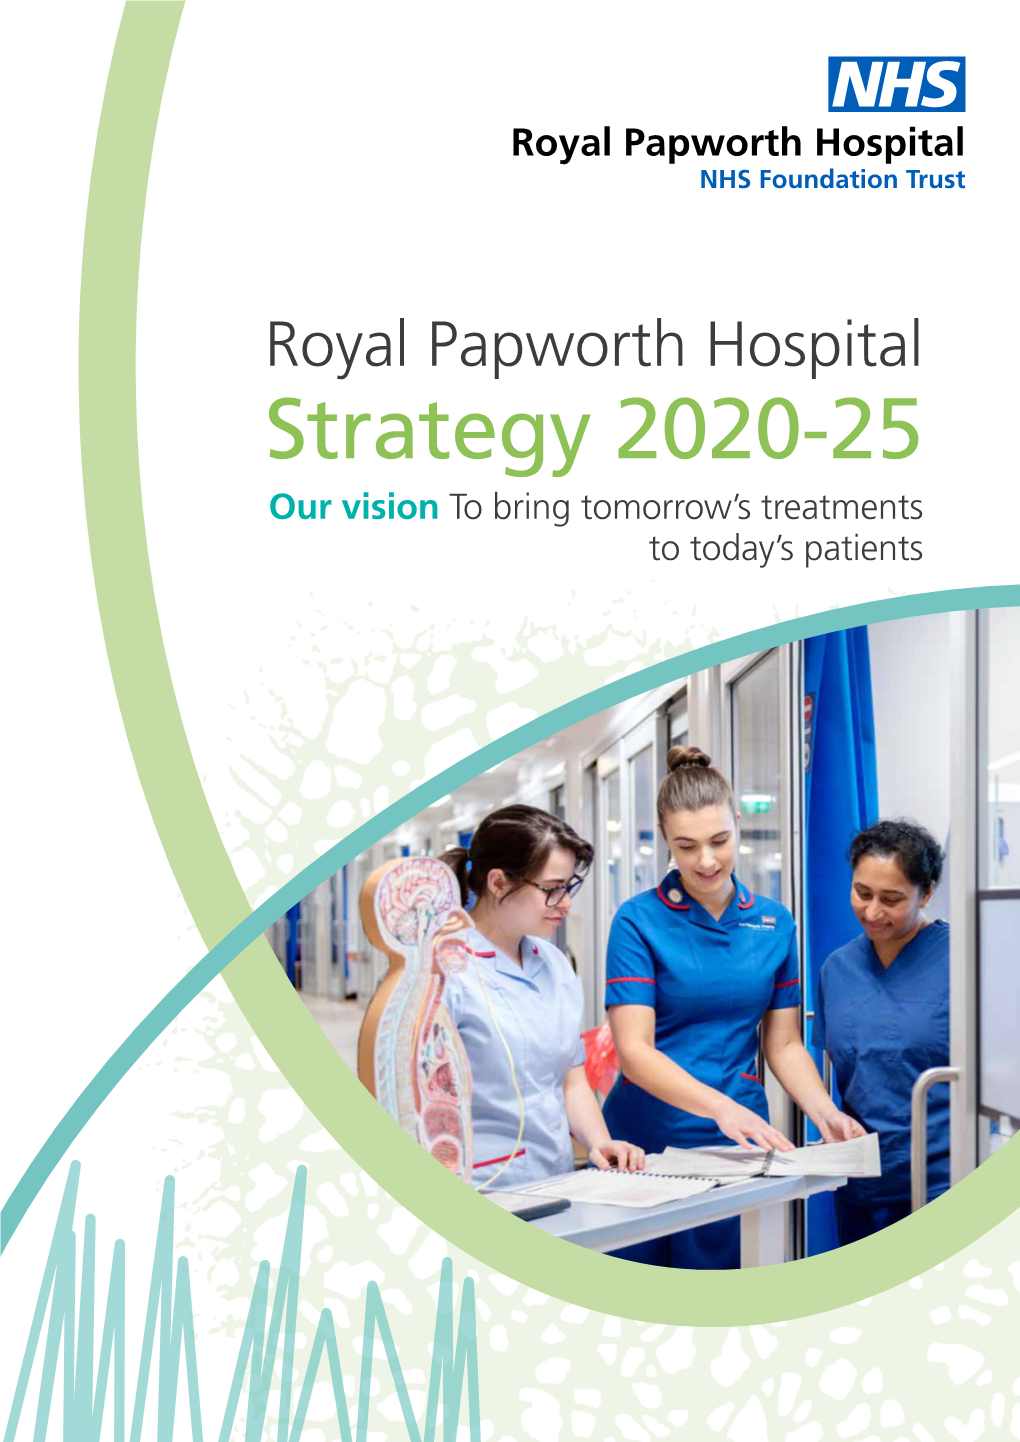 Royal Papworth Hospital Strategy 2020-25 Our Vision to Bring Tomorrow’S Treatments to Today’S Patients Overview and Summary